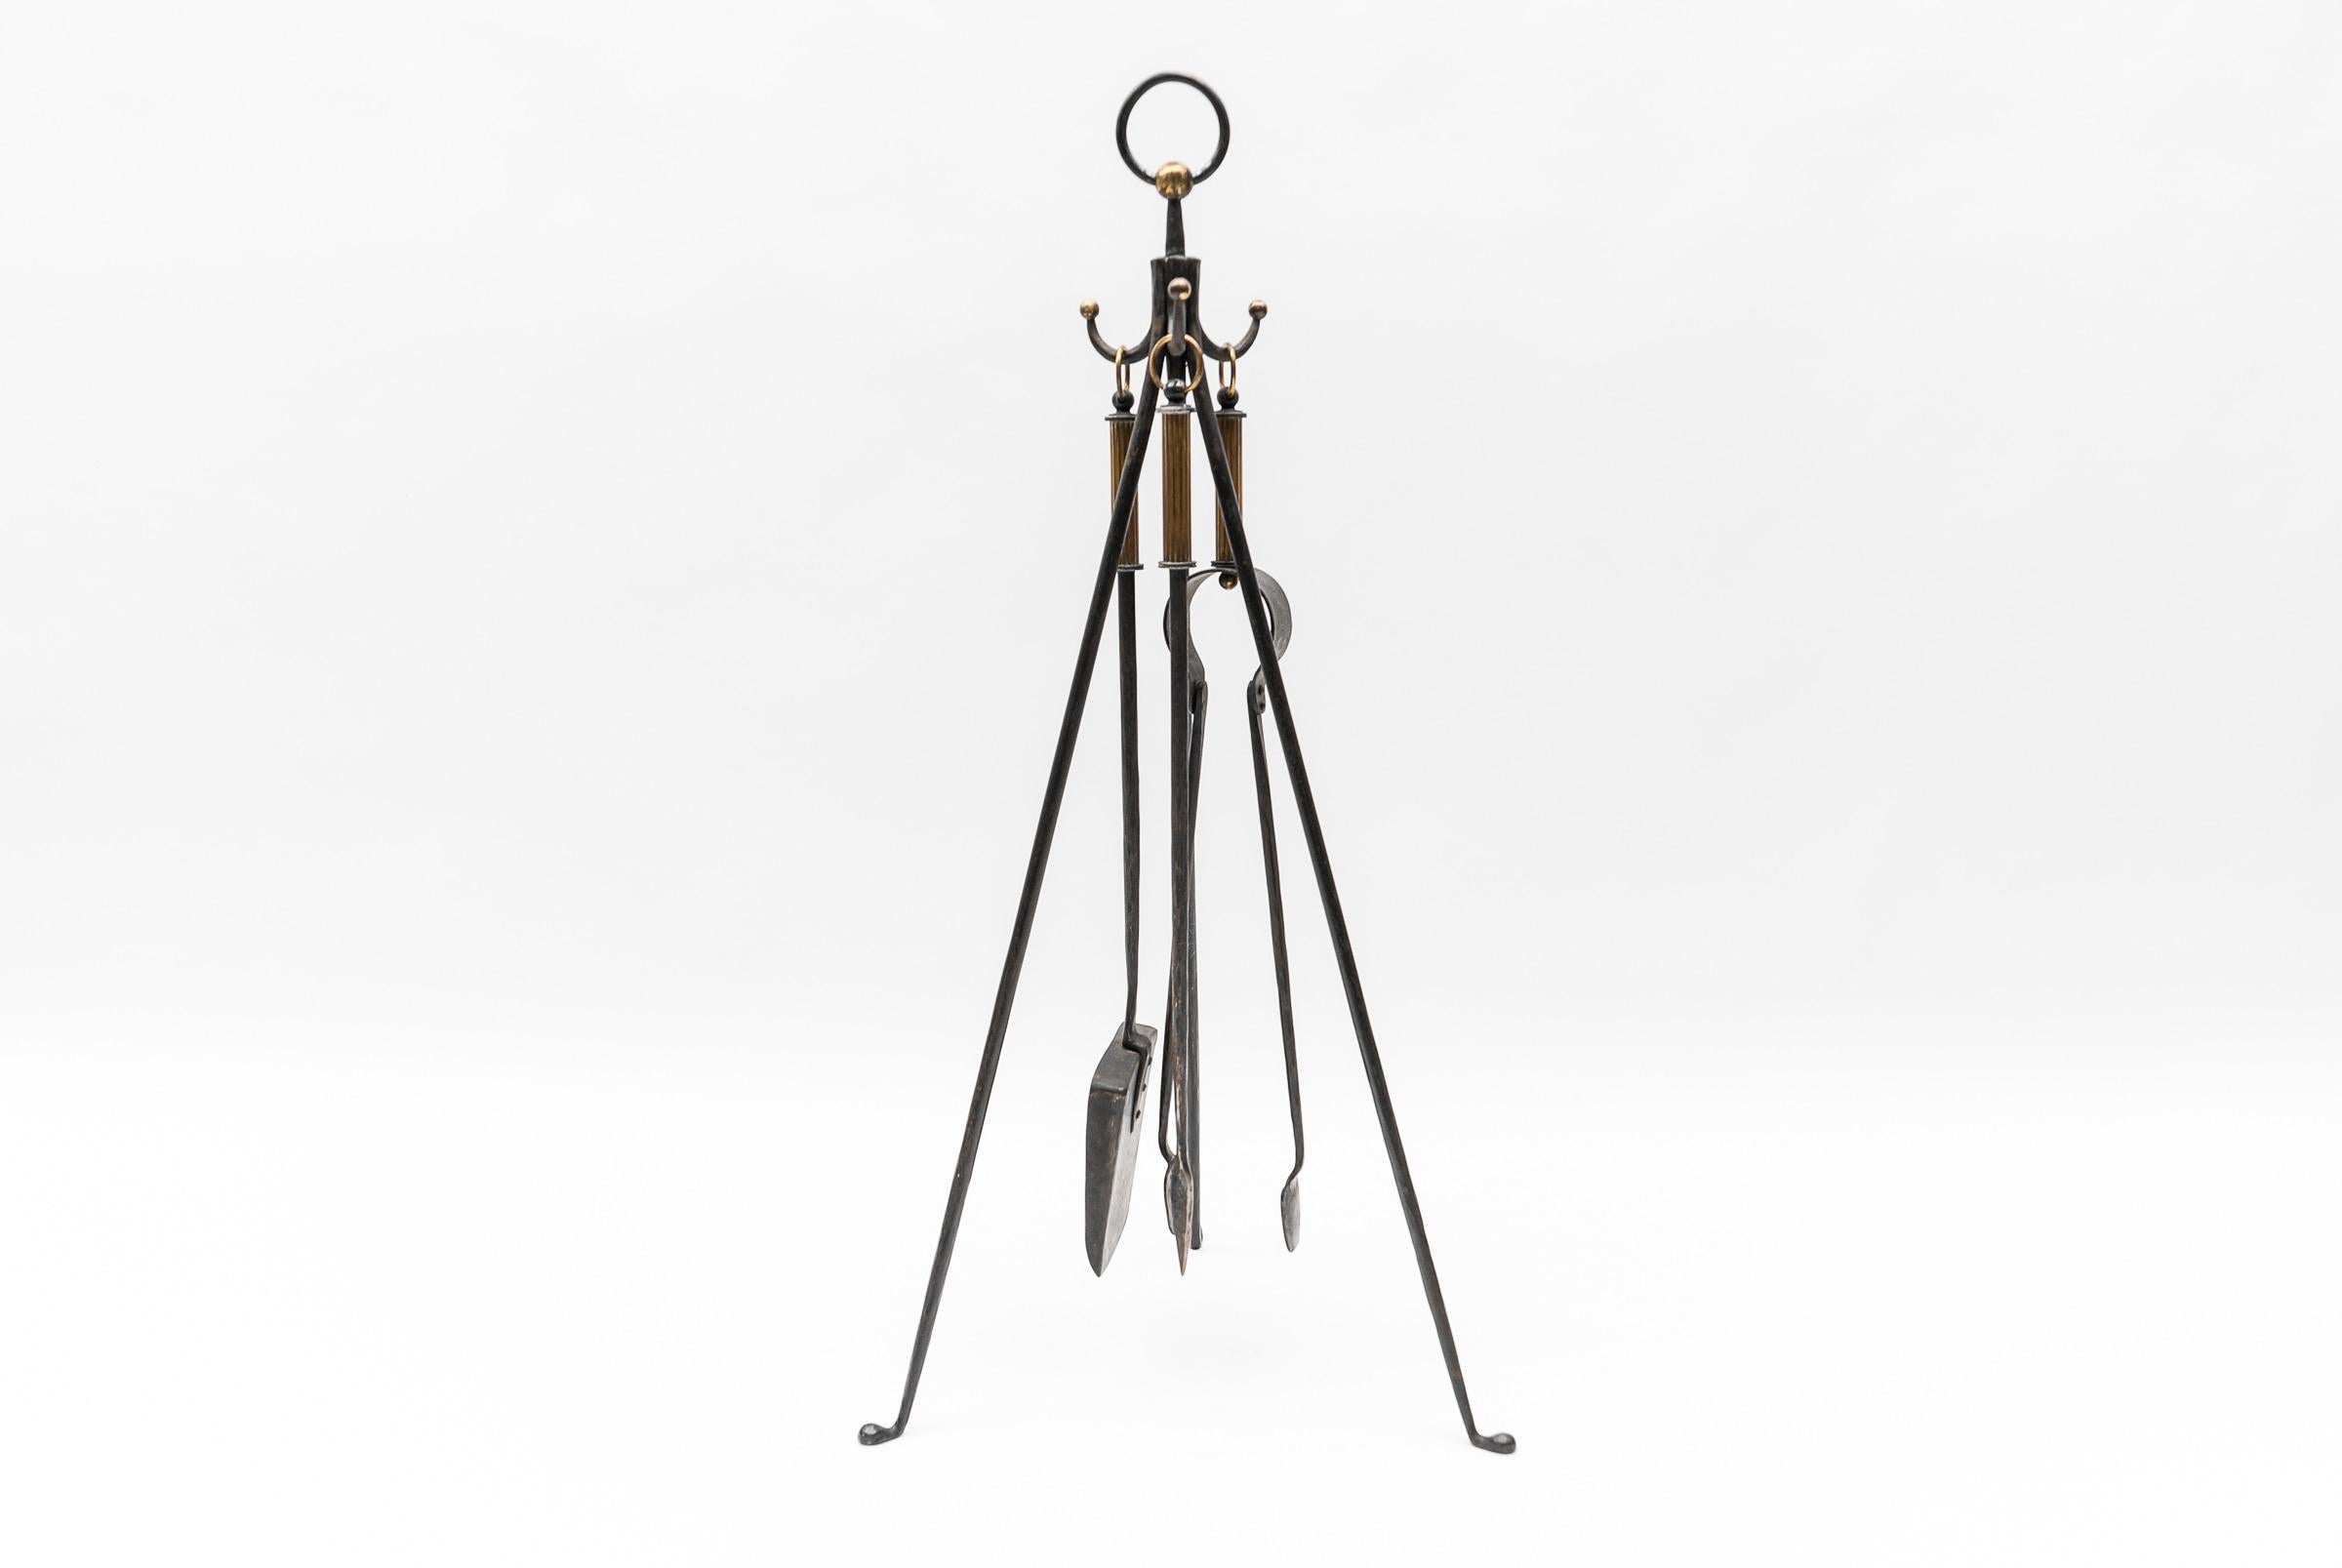 Hand forged tripod iron and brass stand with fireplace tools, Austria 1950s.

Highest quality. Extremely rare and never seen before in such a delicate and coordinated form. 

A real eye-catcher.